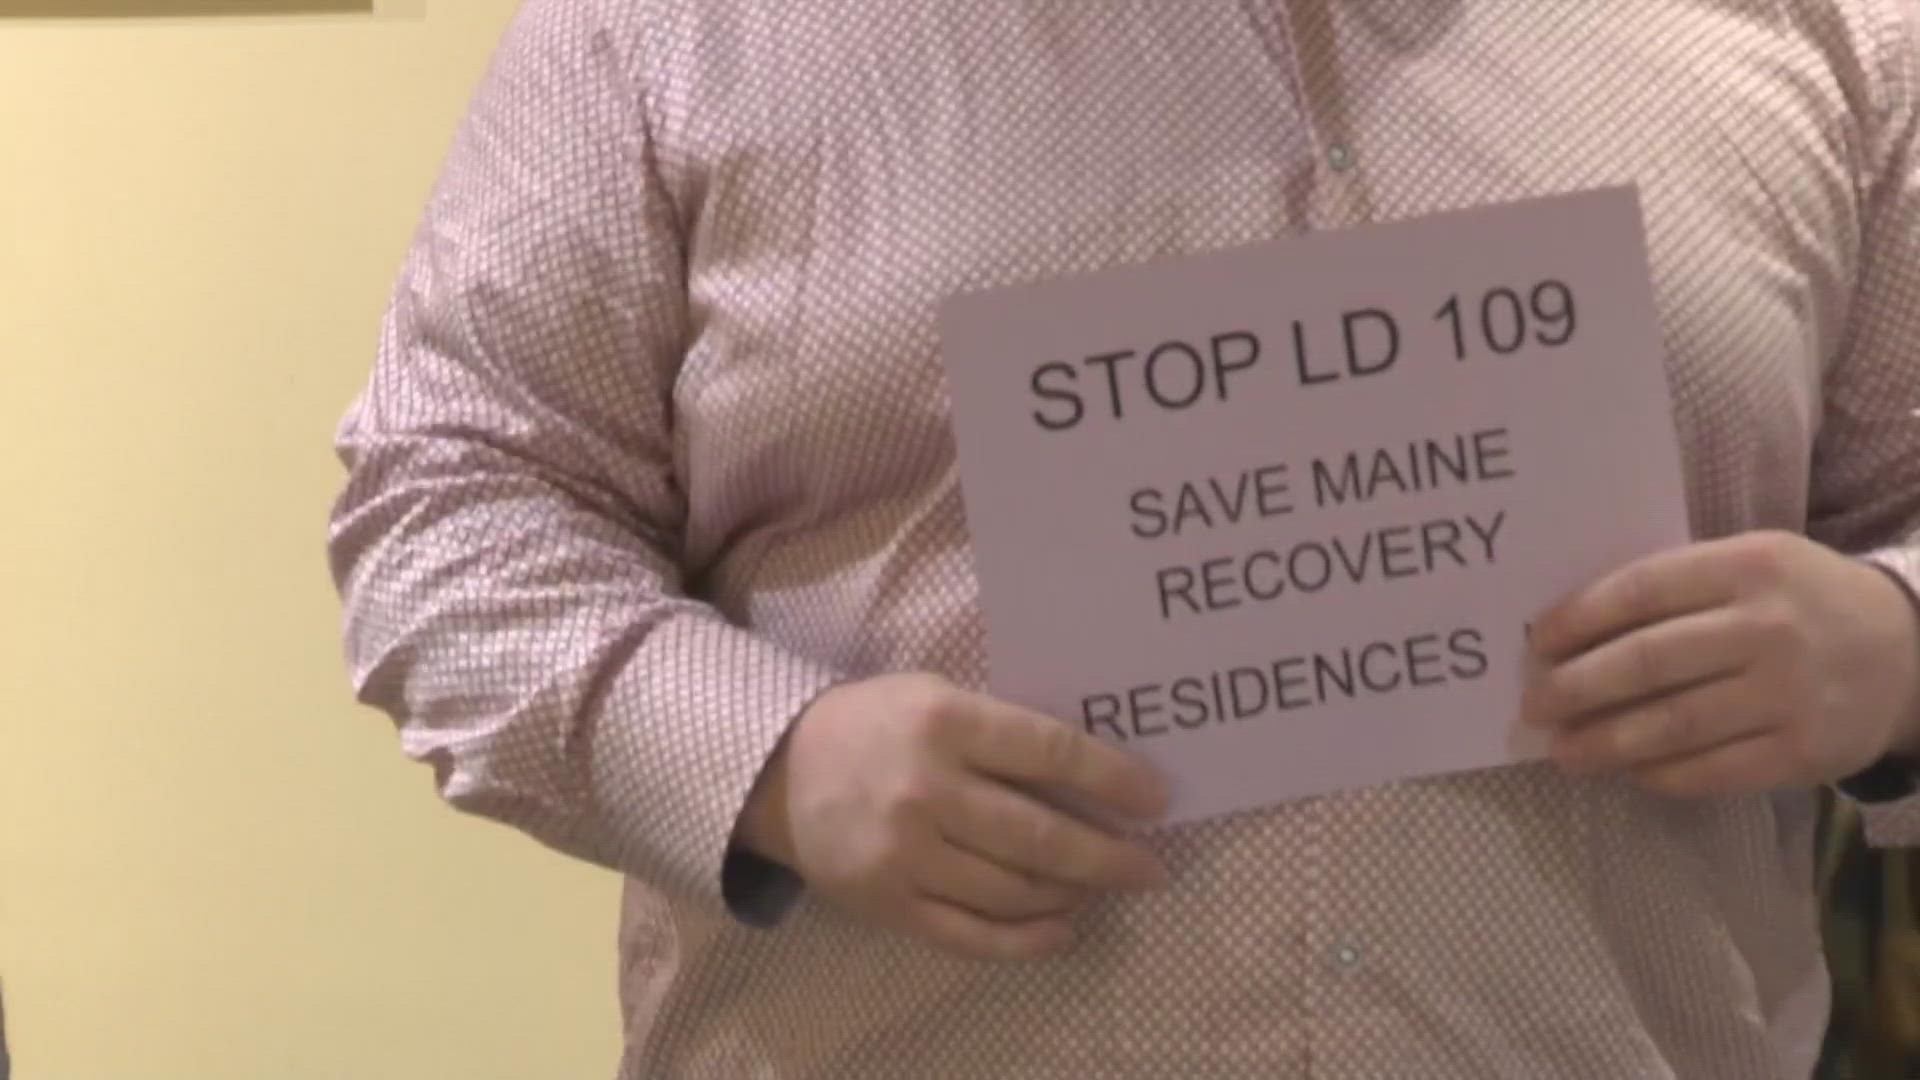 Opponents of LD 109 say this bill would undo work passed three years ago.